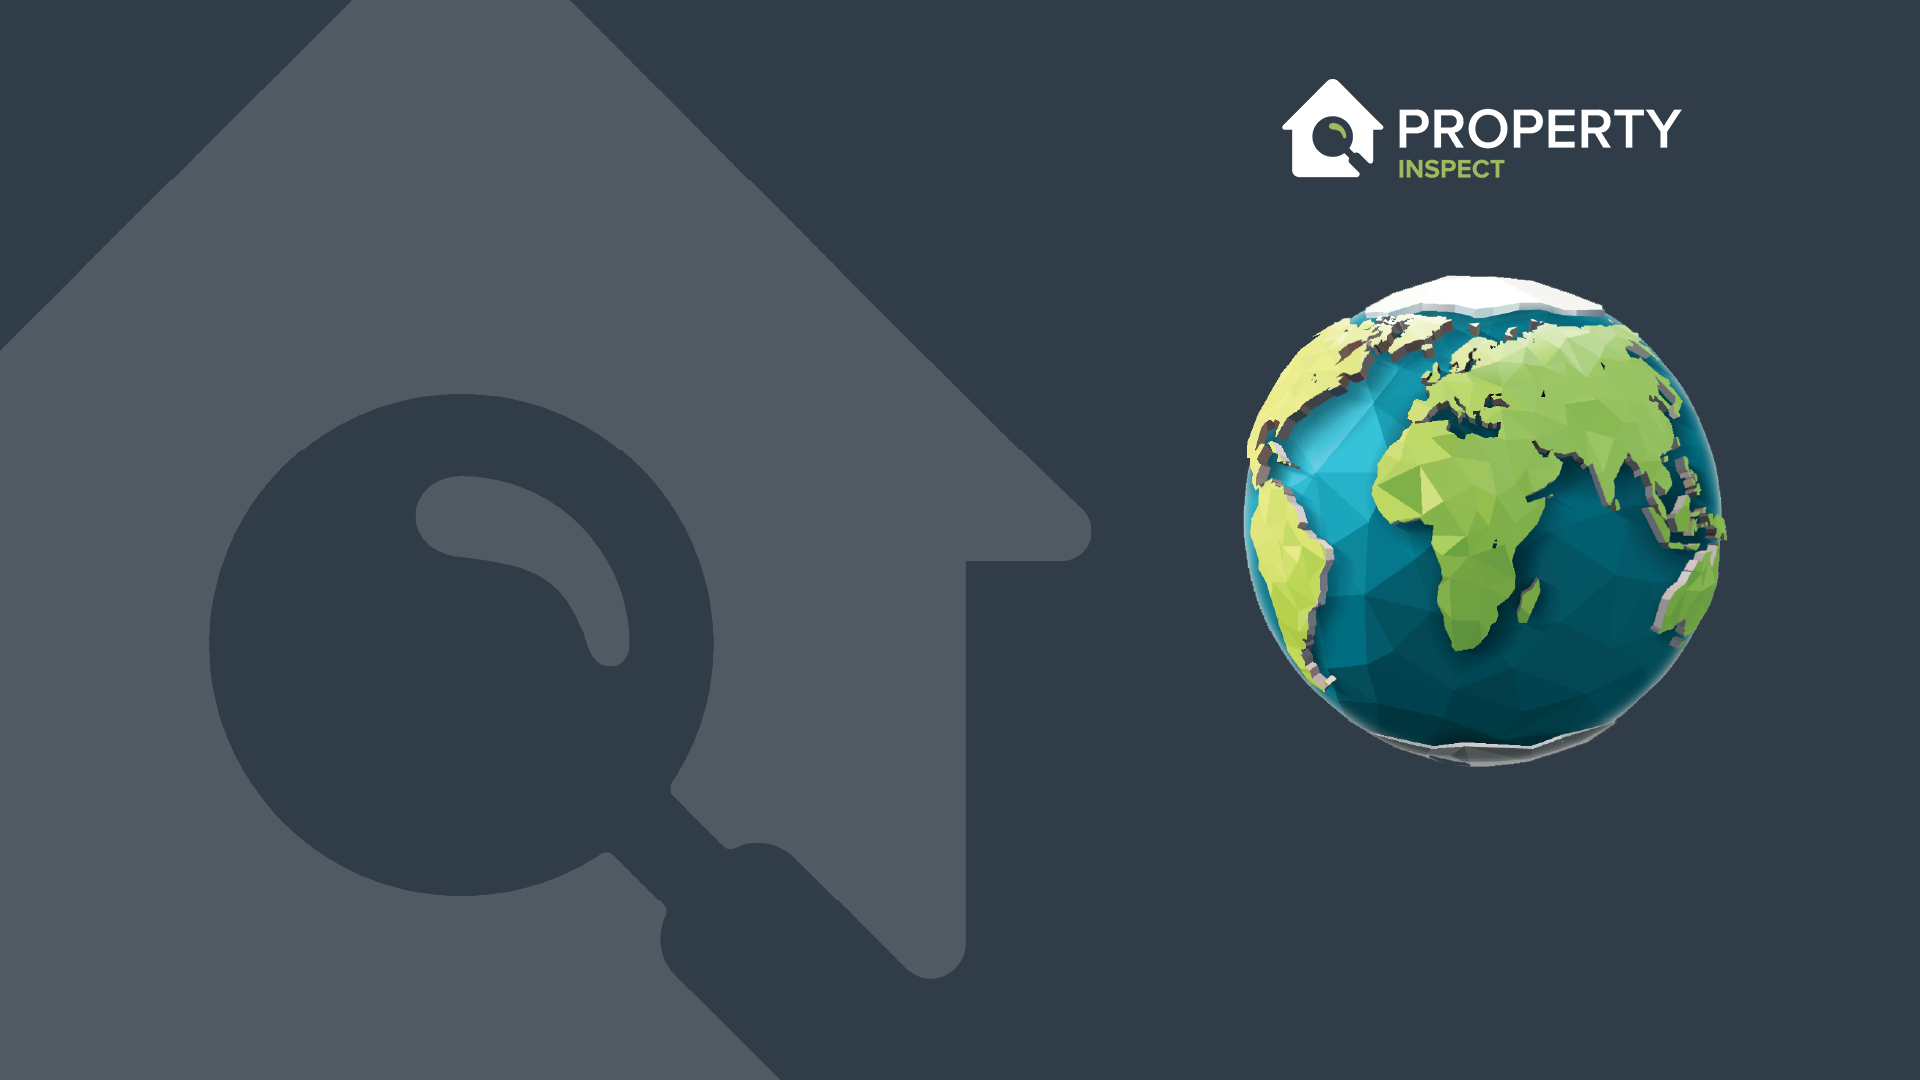 Property Inspect continues rapid global expansion, recruiting in three key areas to further strengthen the team